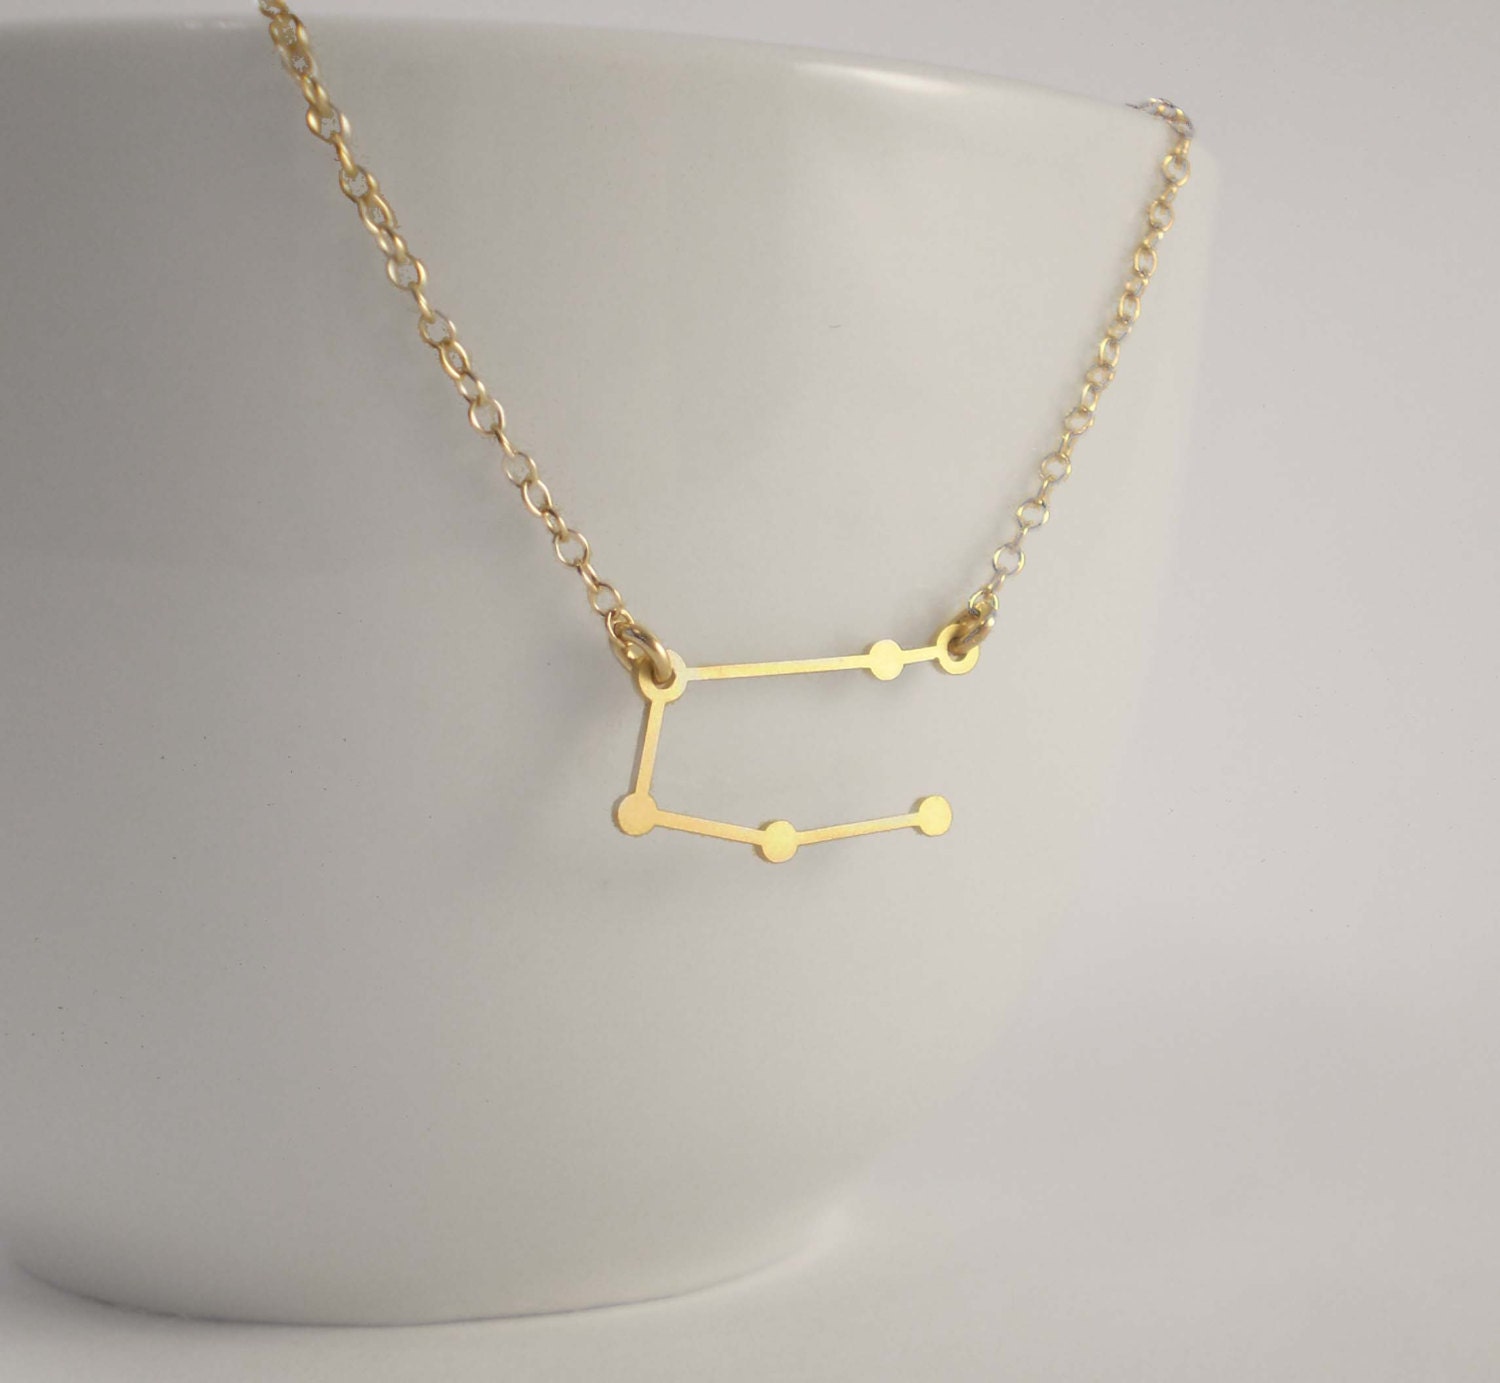 gemini zodiac sign astrology necklace constellation